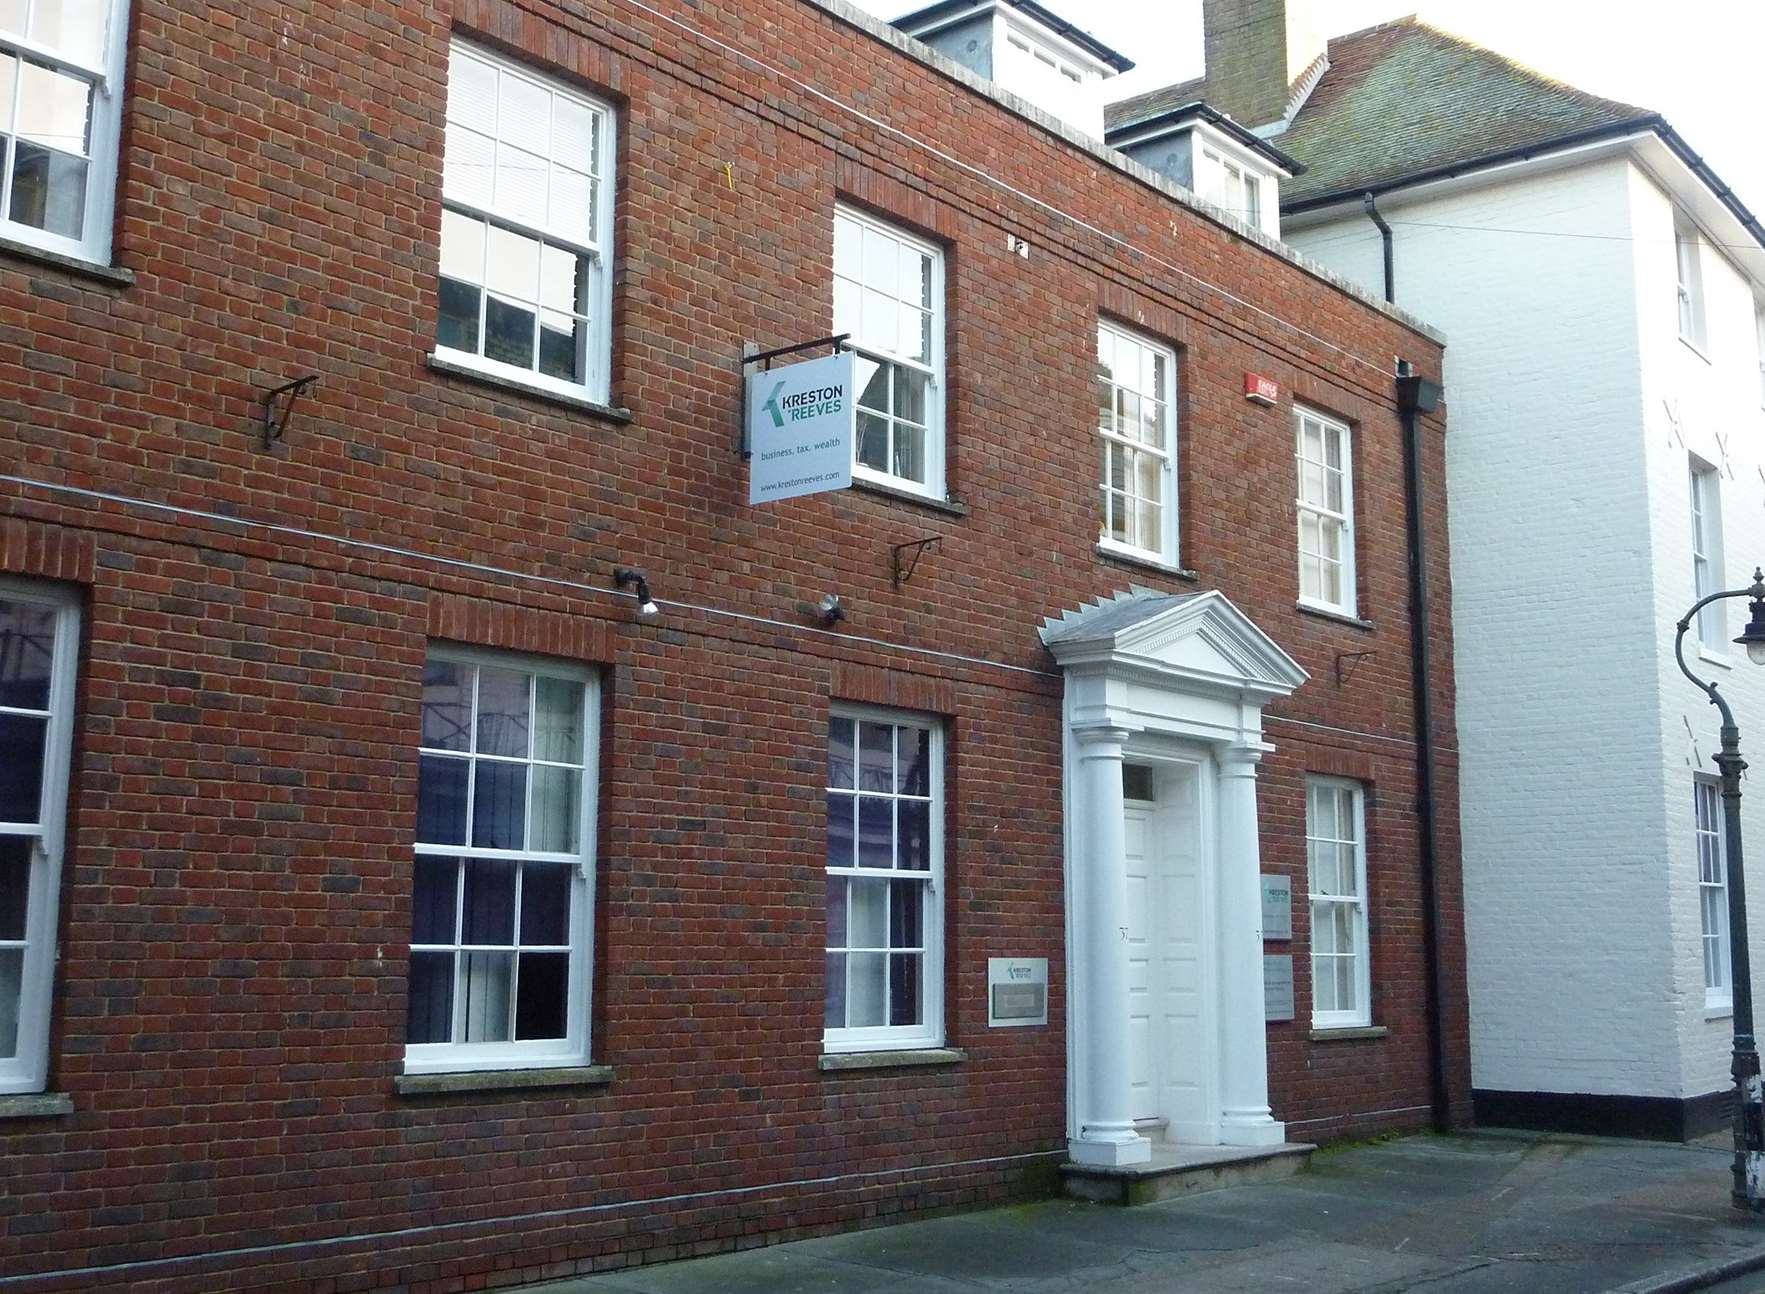 The Canterbury office of Kreston Reeves